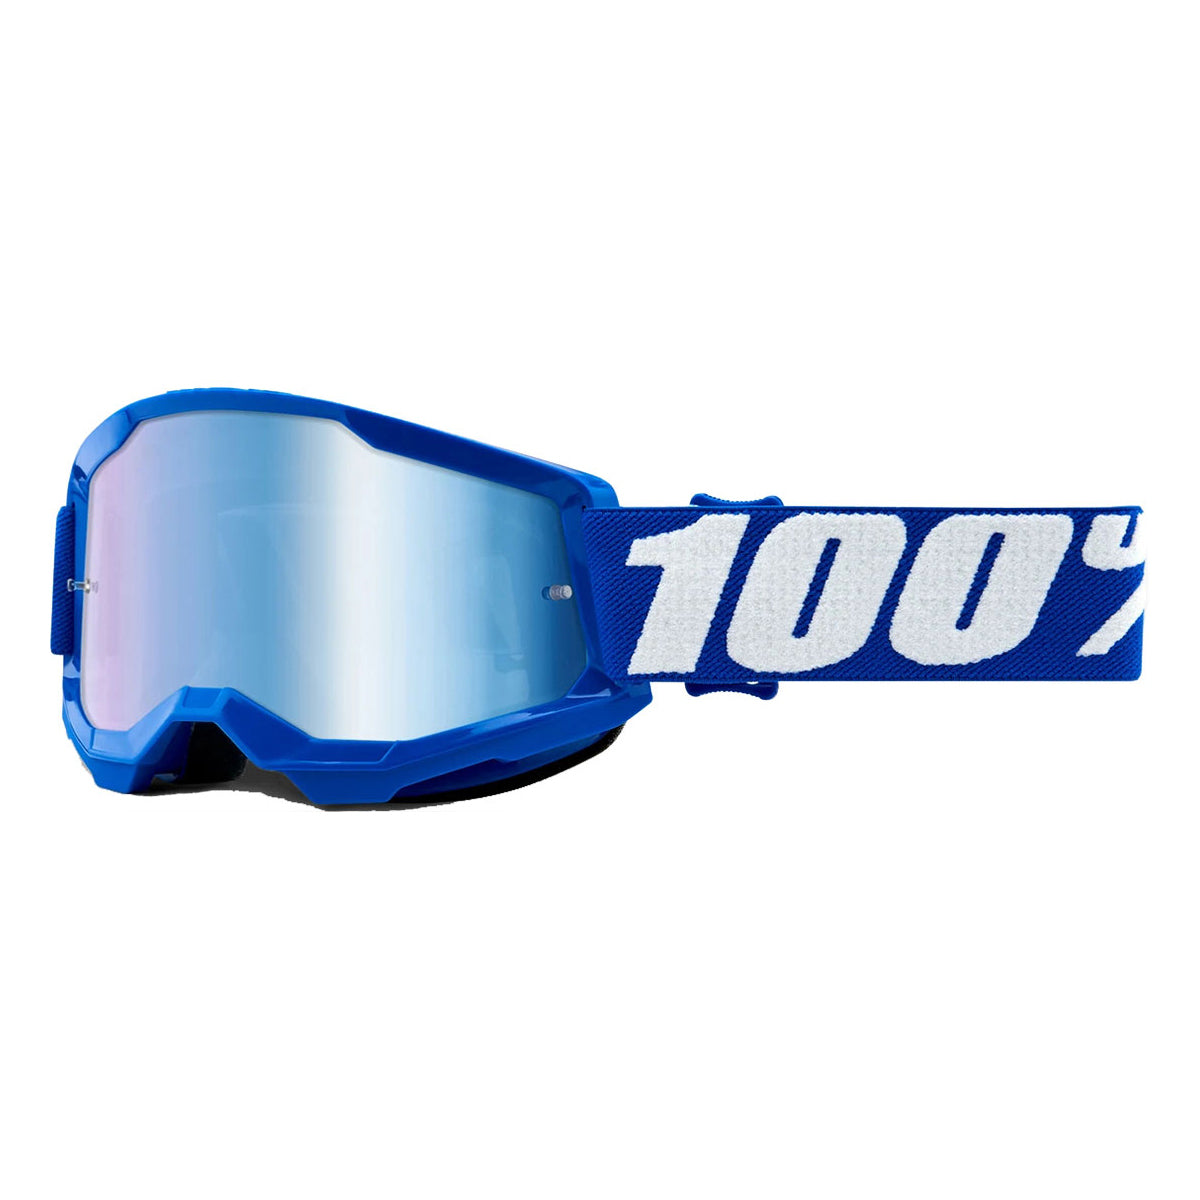 100 Percent Strata 2 Youth Goggles - Blue - Blue Mirror Lens